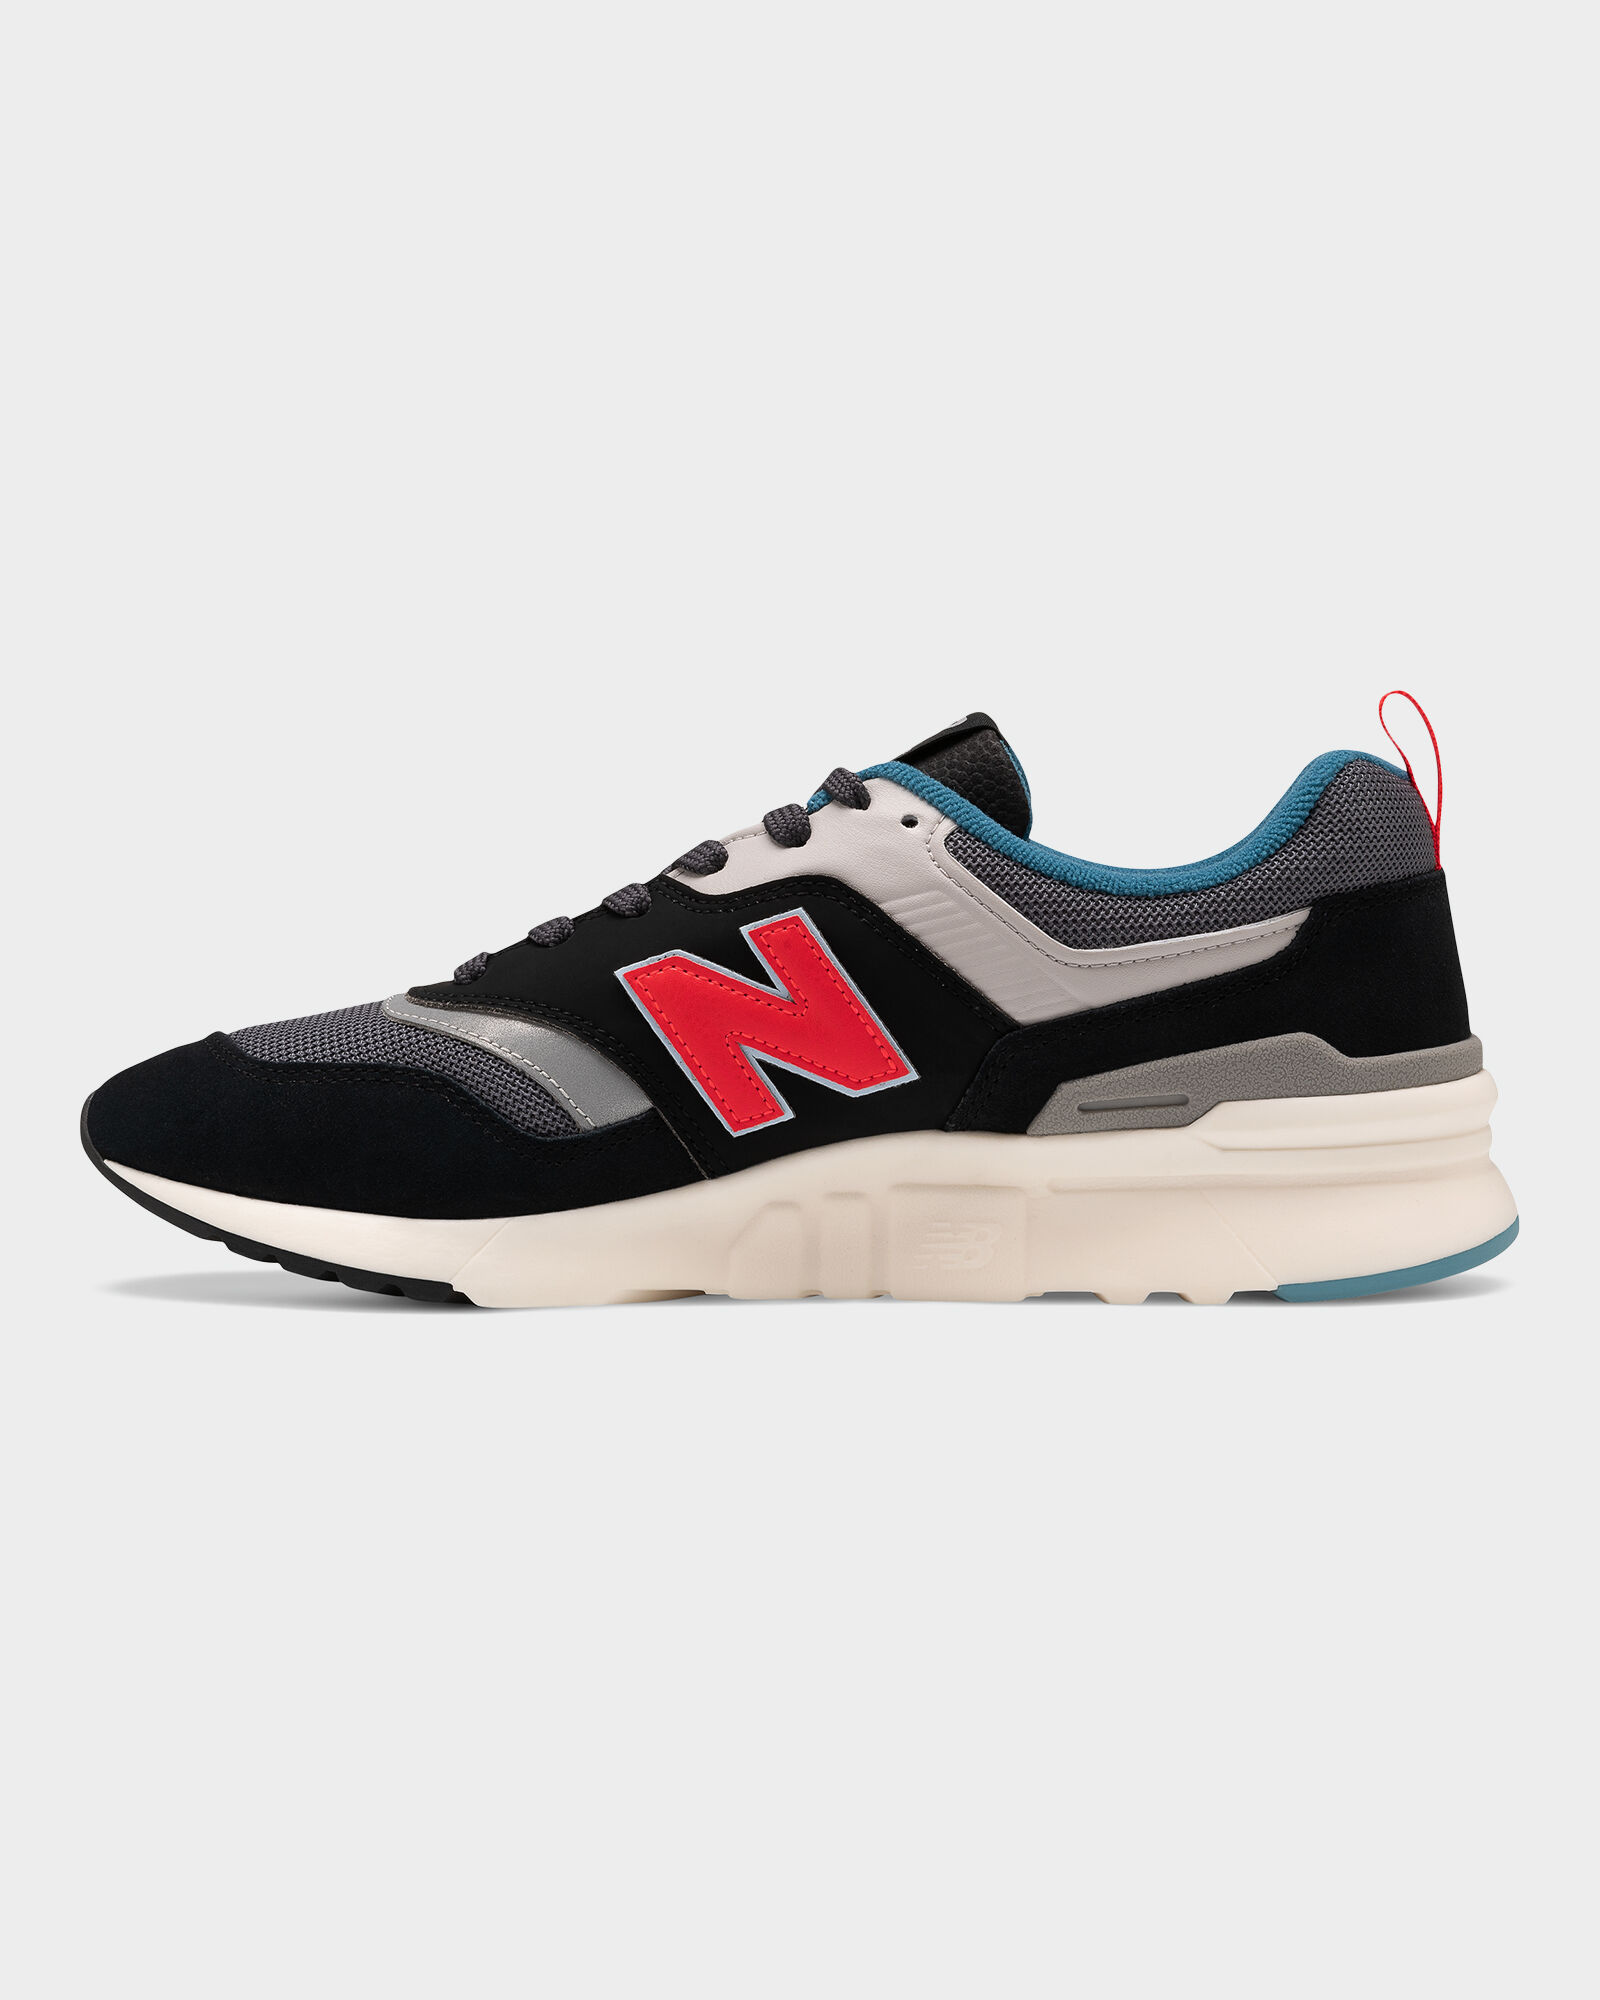 Black/red/grey Suede NEW BALANCE 997H 